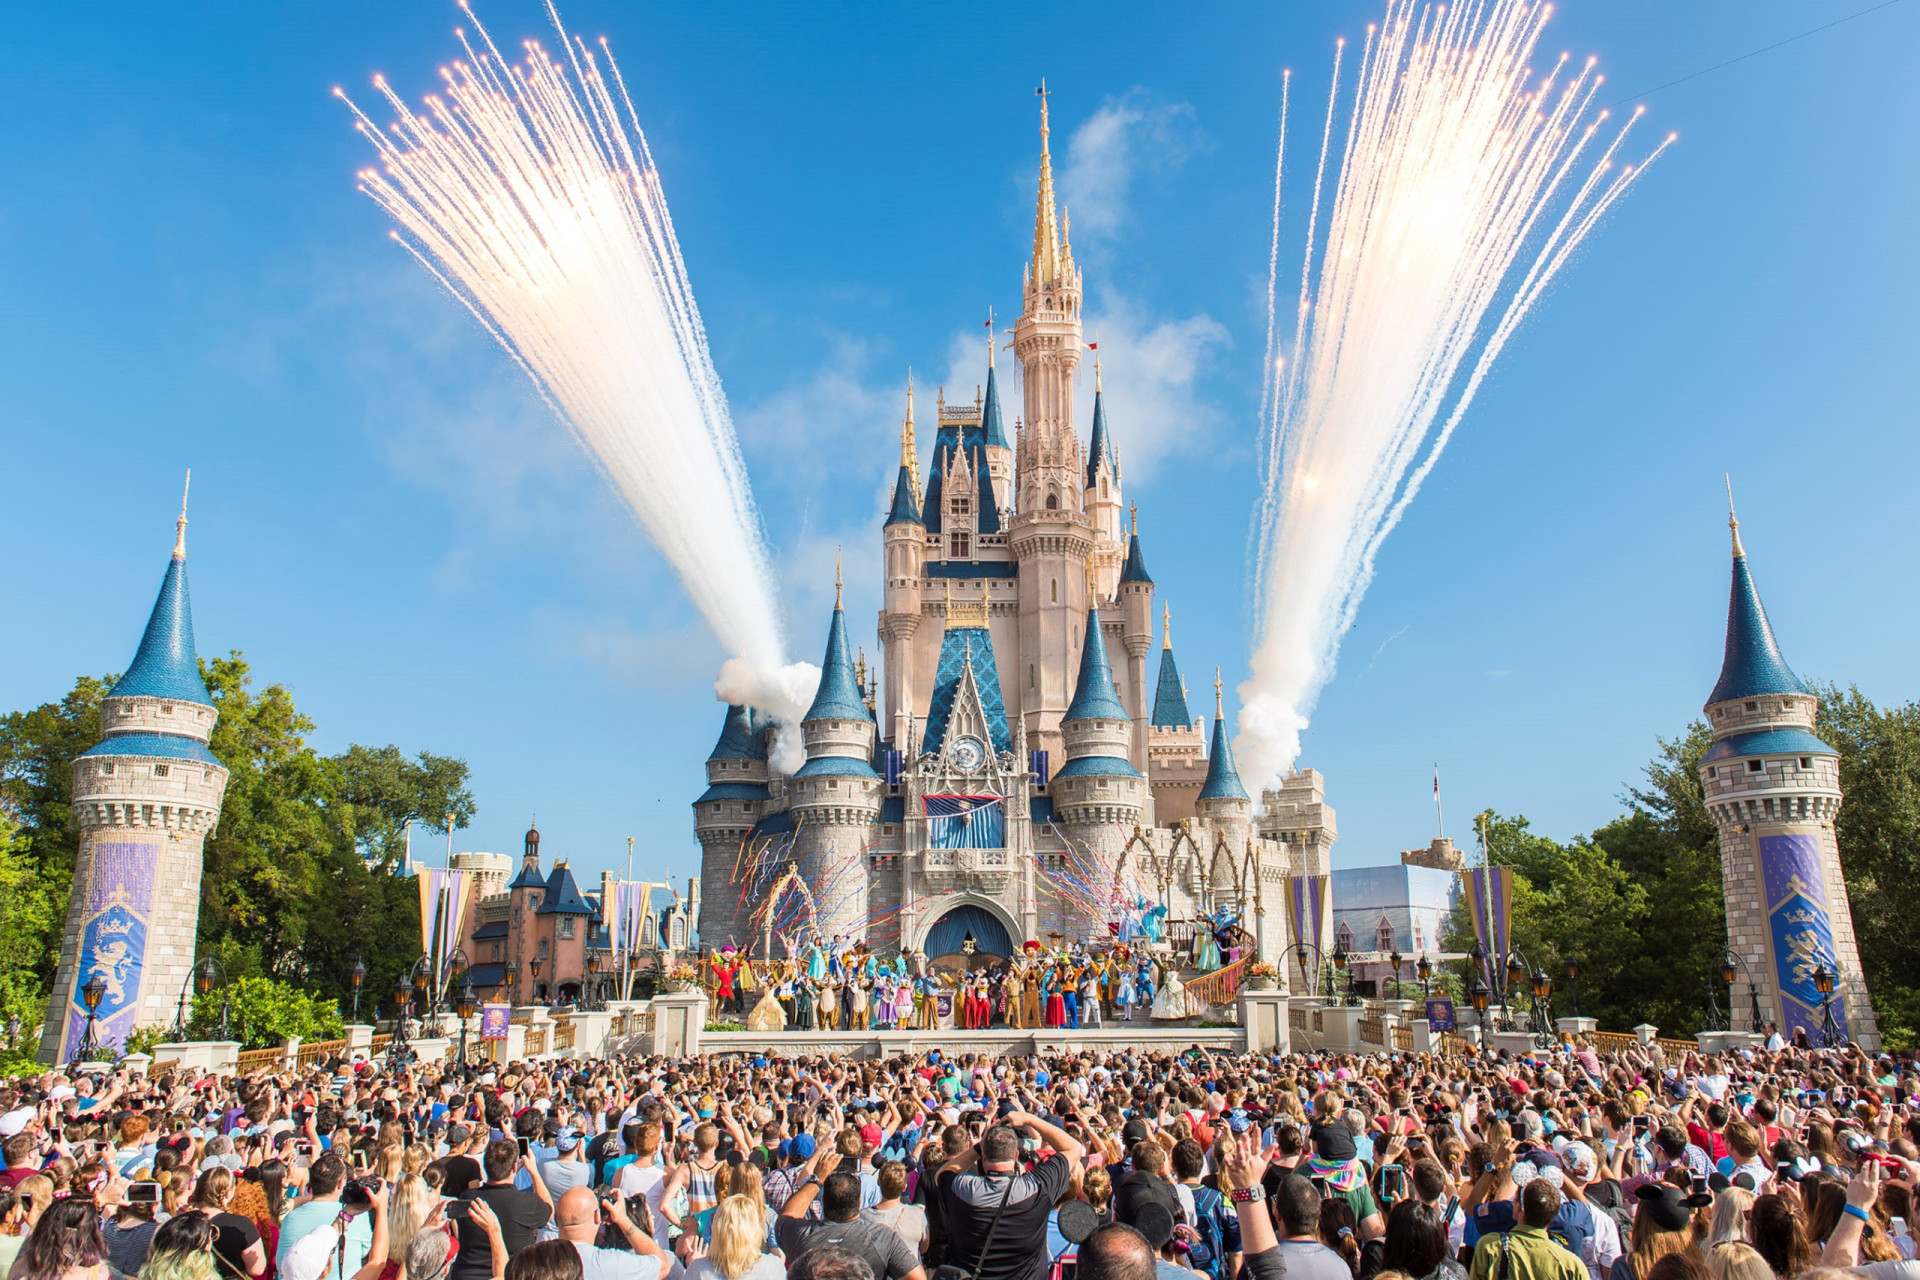 <p>The state of Florida appears to be a central destination for the US traveler. Of course, we can't forget that Orlando includes Disney World, which receives over 58 millions visitors annually.</p><p><a href="https://www.msn.com/en-us/community/channel/vid-7xx8mnucu55yw63we9va2gwr7uihbxwc68fxqp25x6tg4ftibpra?cvid=94631541bc0f4f89bfd59158d696ad7e">Follow us and access great exclusive content every day</a></p>